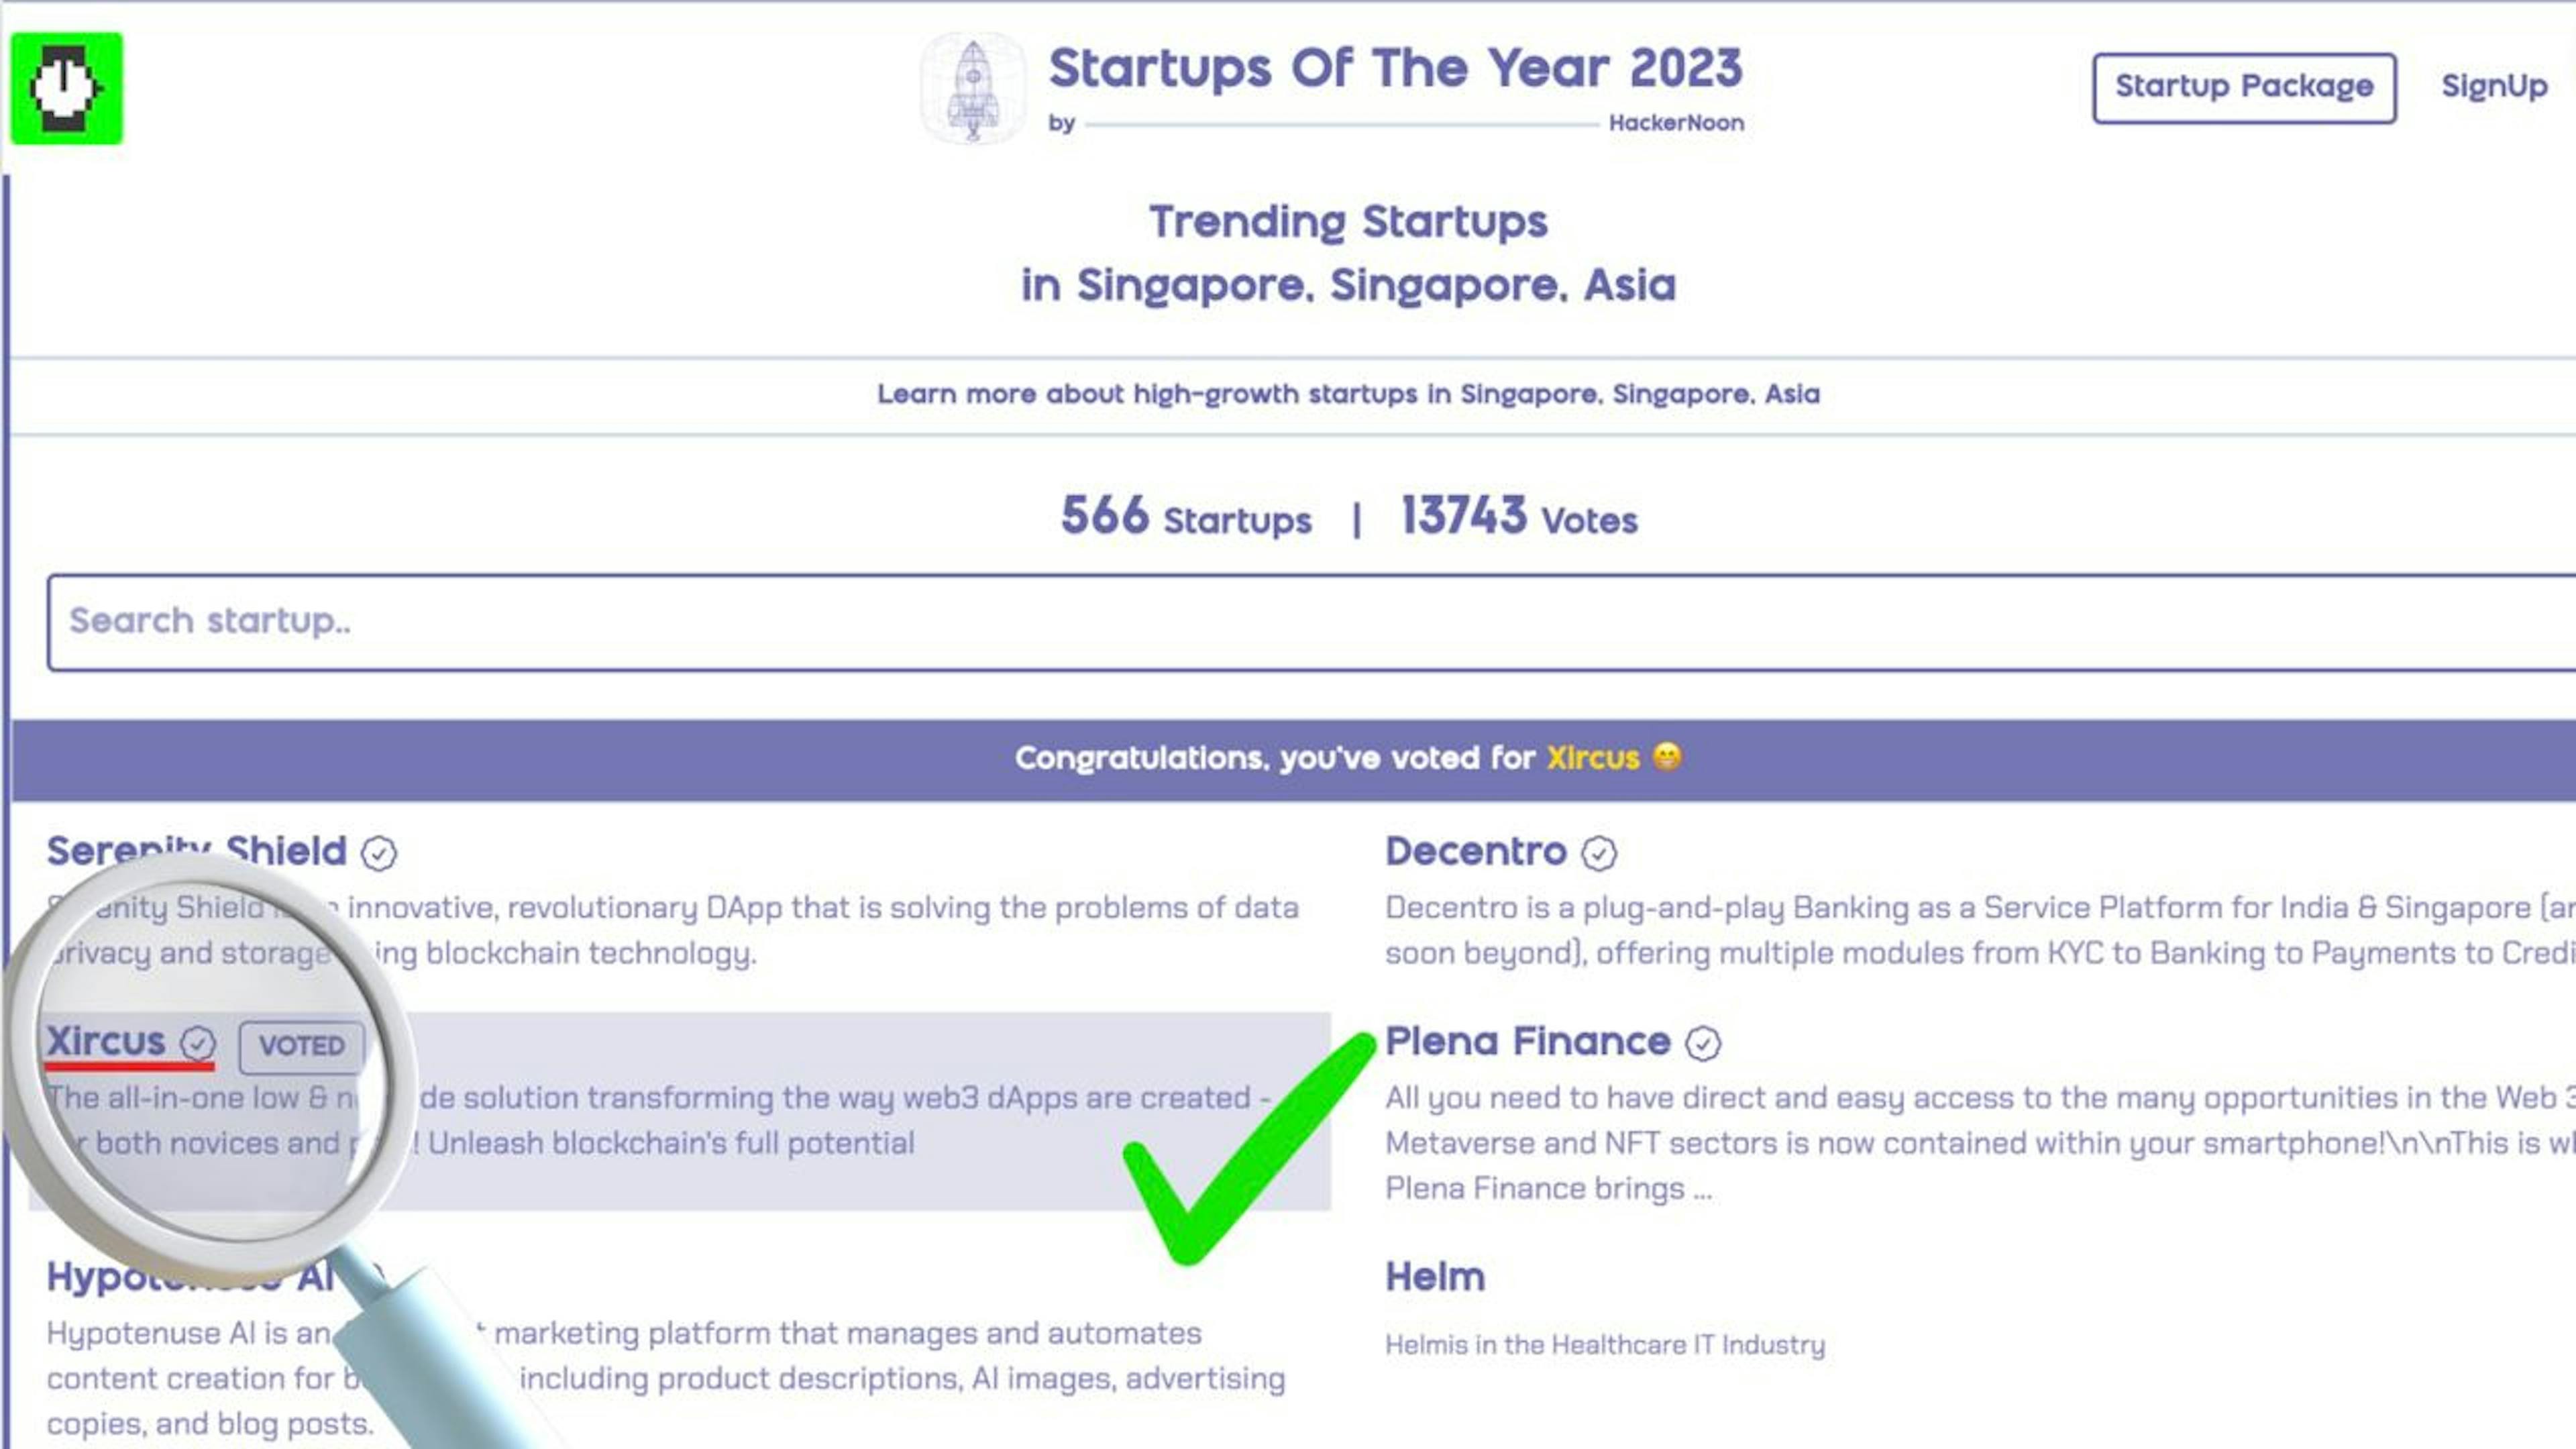 Xircus on HackerNoon's "Startups of the Year 2023" Award